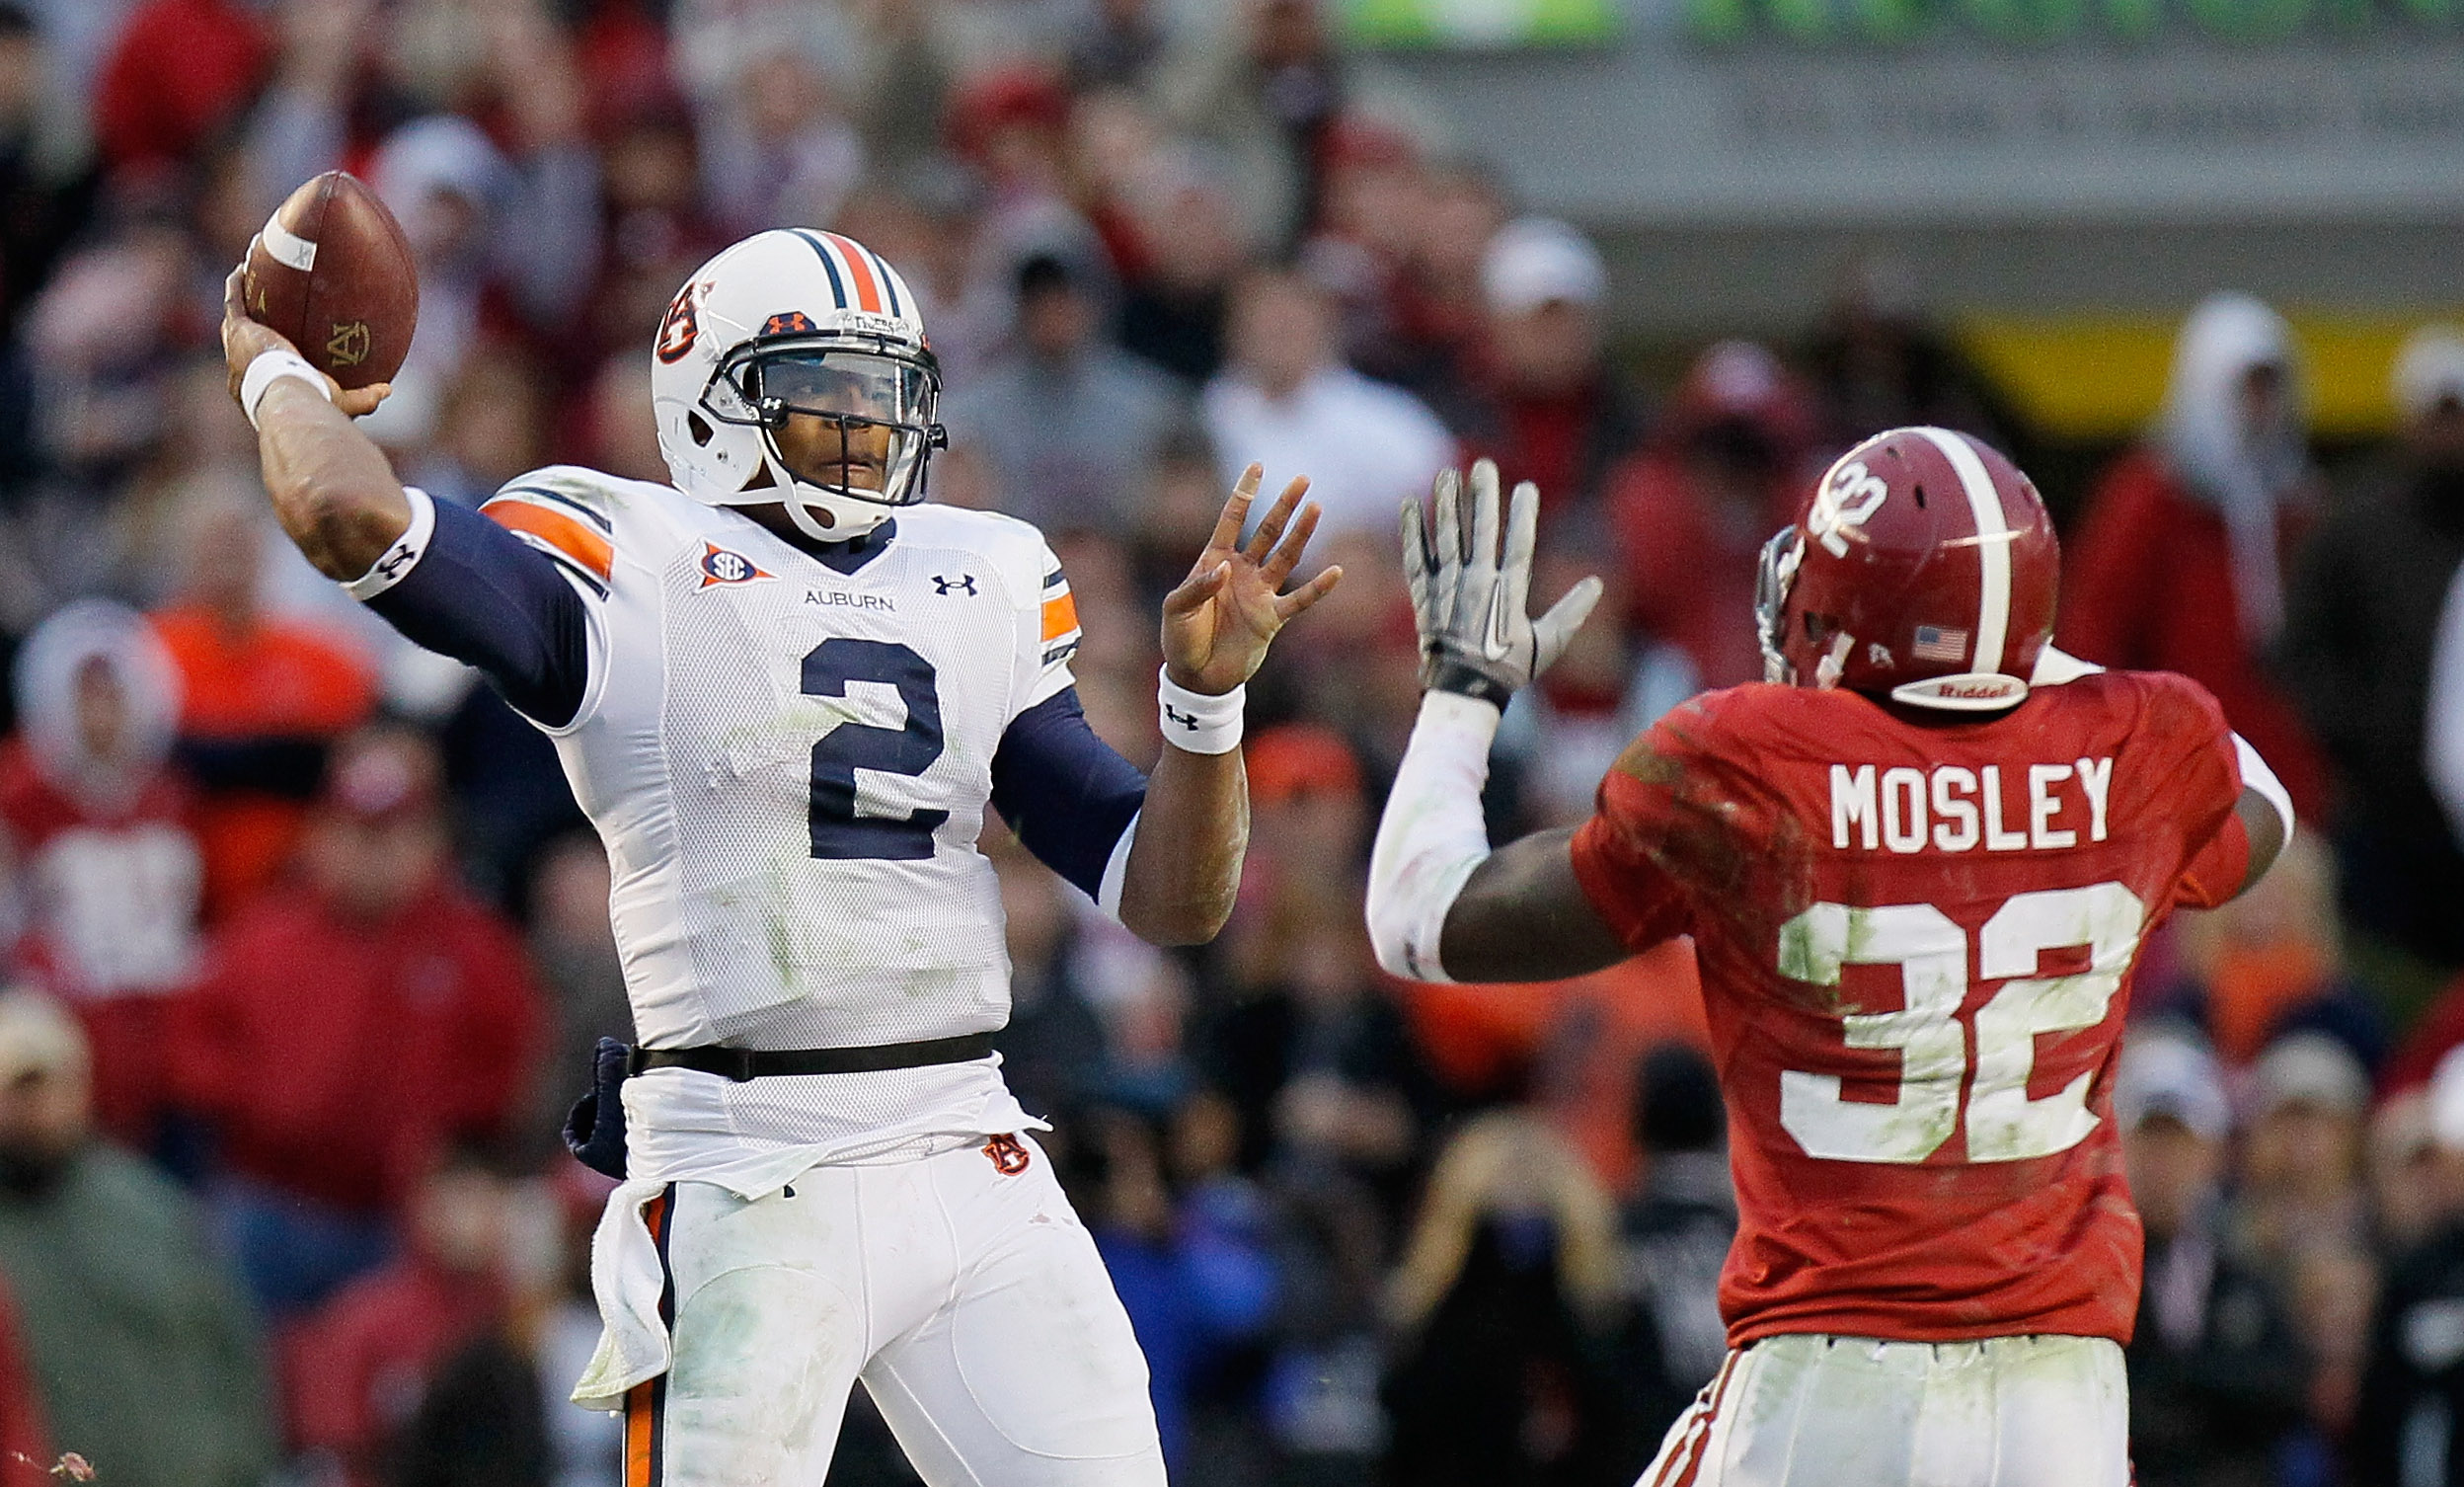 TUSCALOOSA, AL - NOVEMBER 26:  Quarterback Cam Newton #2 of the Auburn Tigers looks to pass against C.J. Mosley #32 of the Alabama Crimson Tide at Bryant-Denny Stadium on November 26, 2010 in Tuscaloosa, Alabama.  (Photo by Kevin C. Cox/Getty Images)